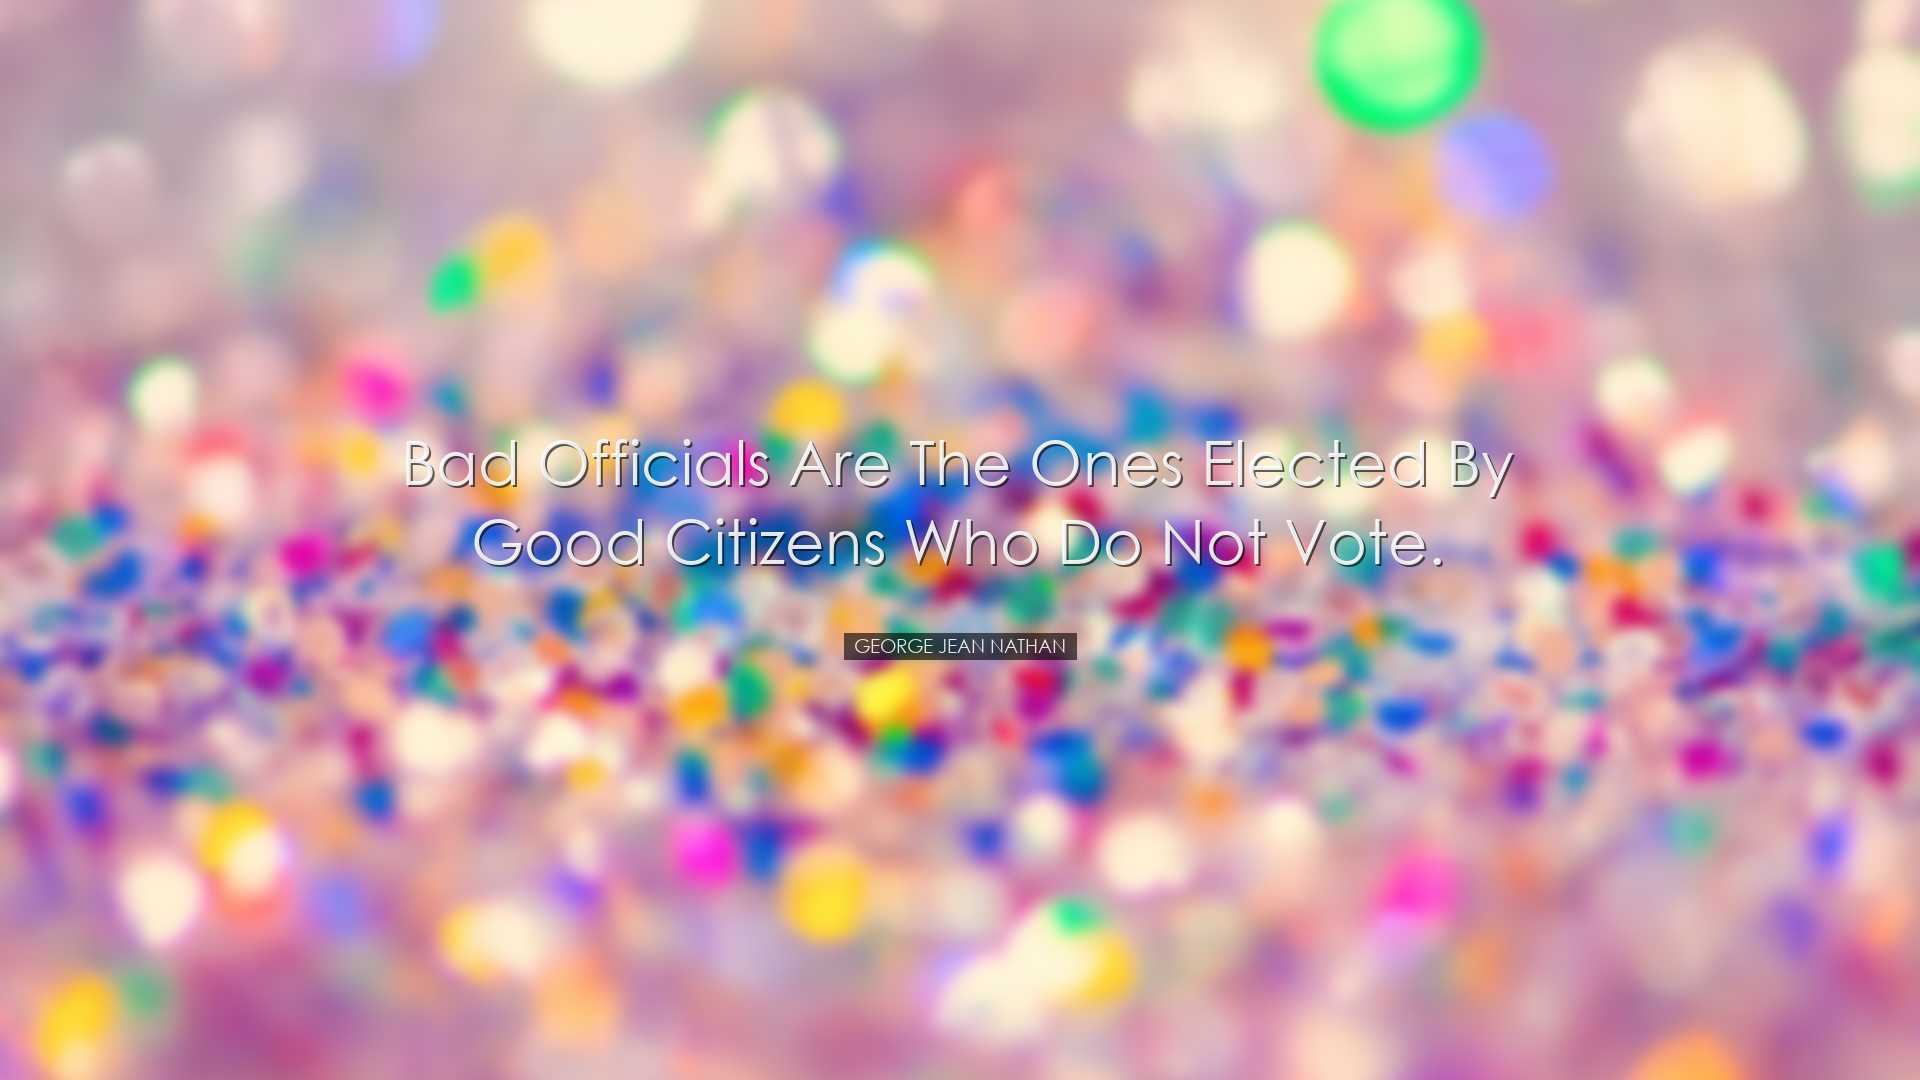 Bad officials are the ones elected by good citizens who do not vot